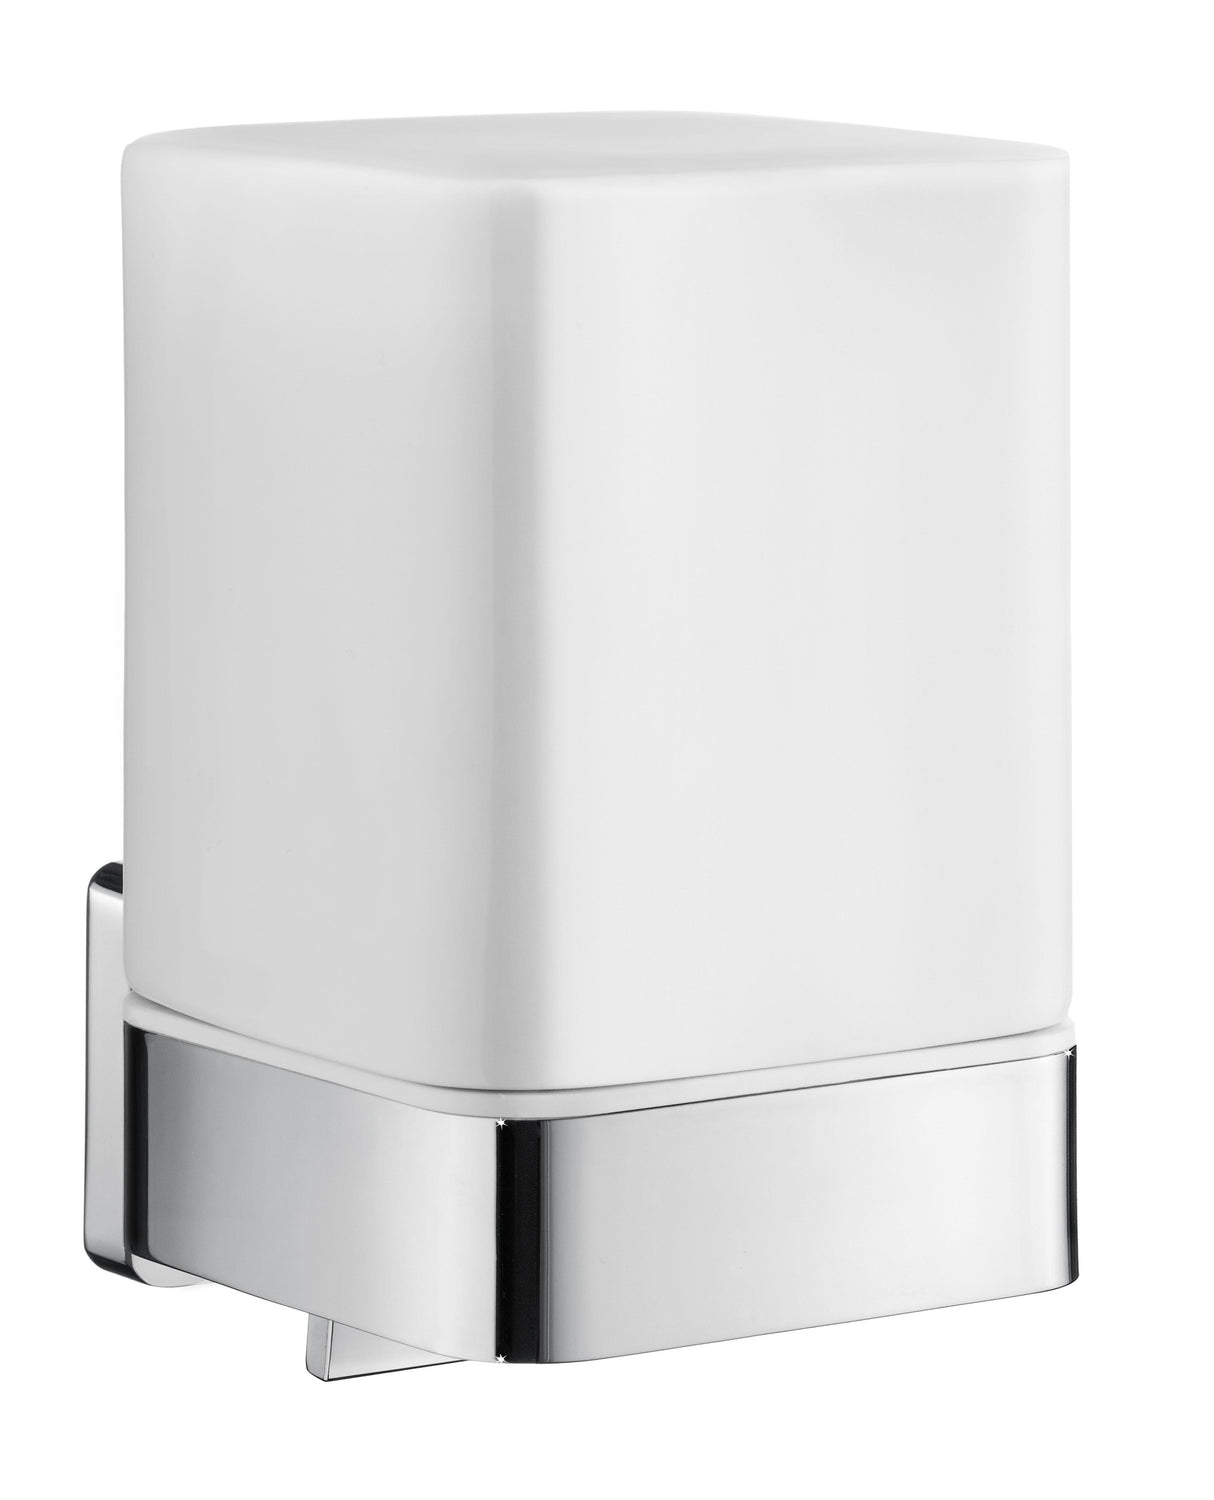 Smedbo Ice Holder with Soap Dispenser with dispenser in Polished chrome